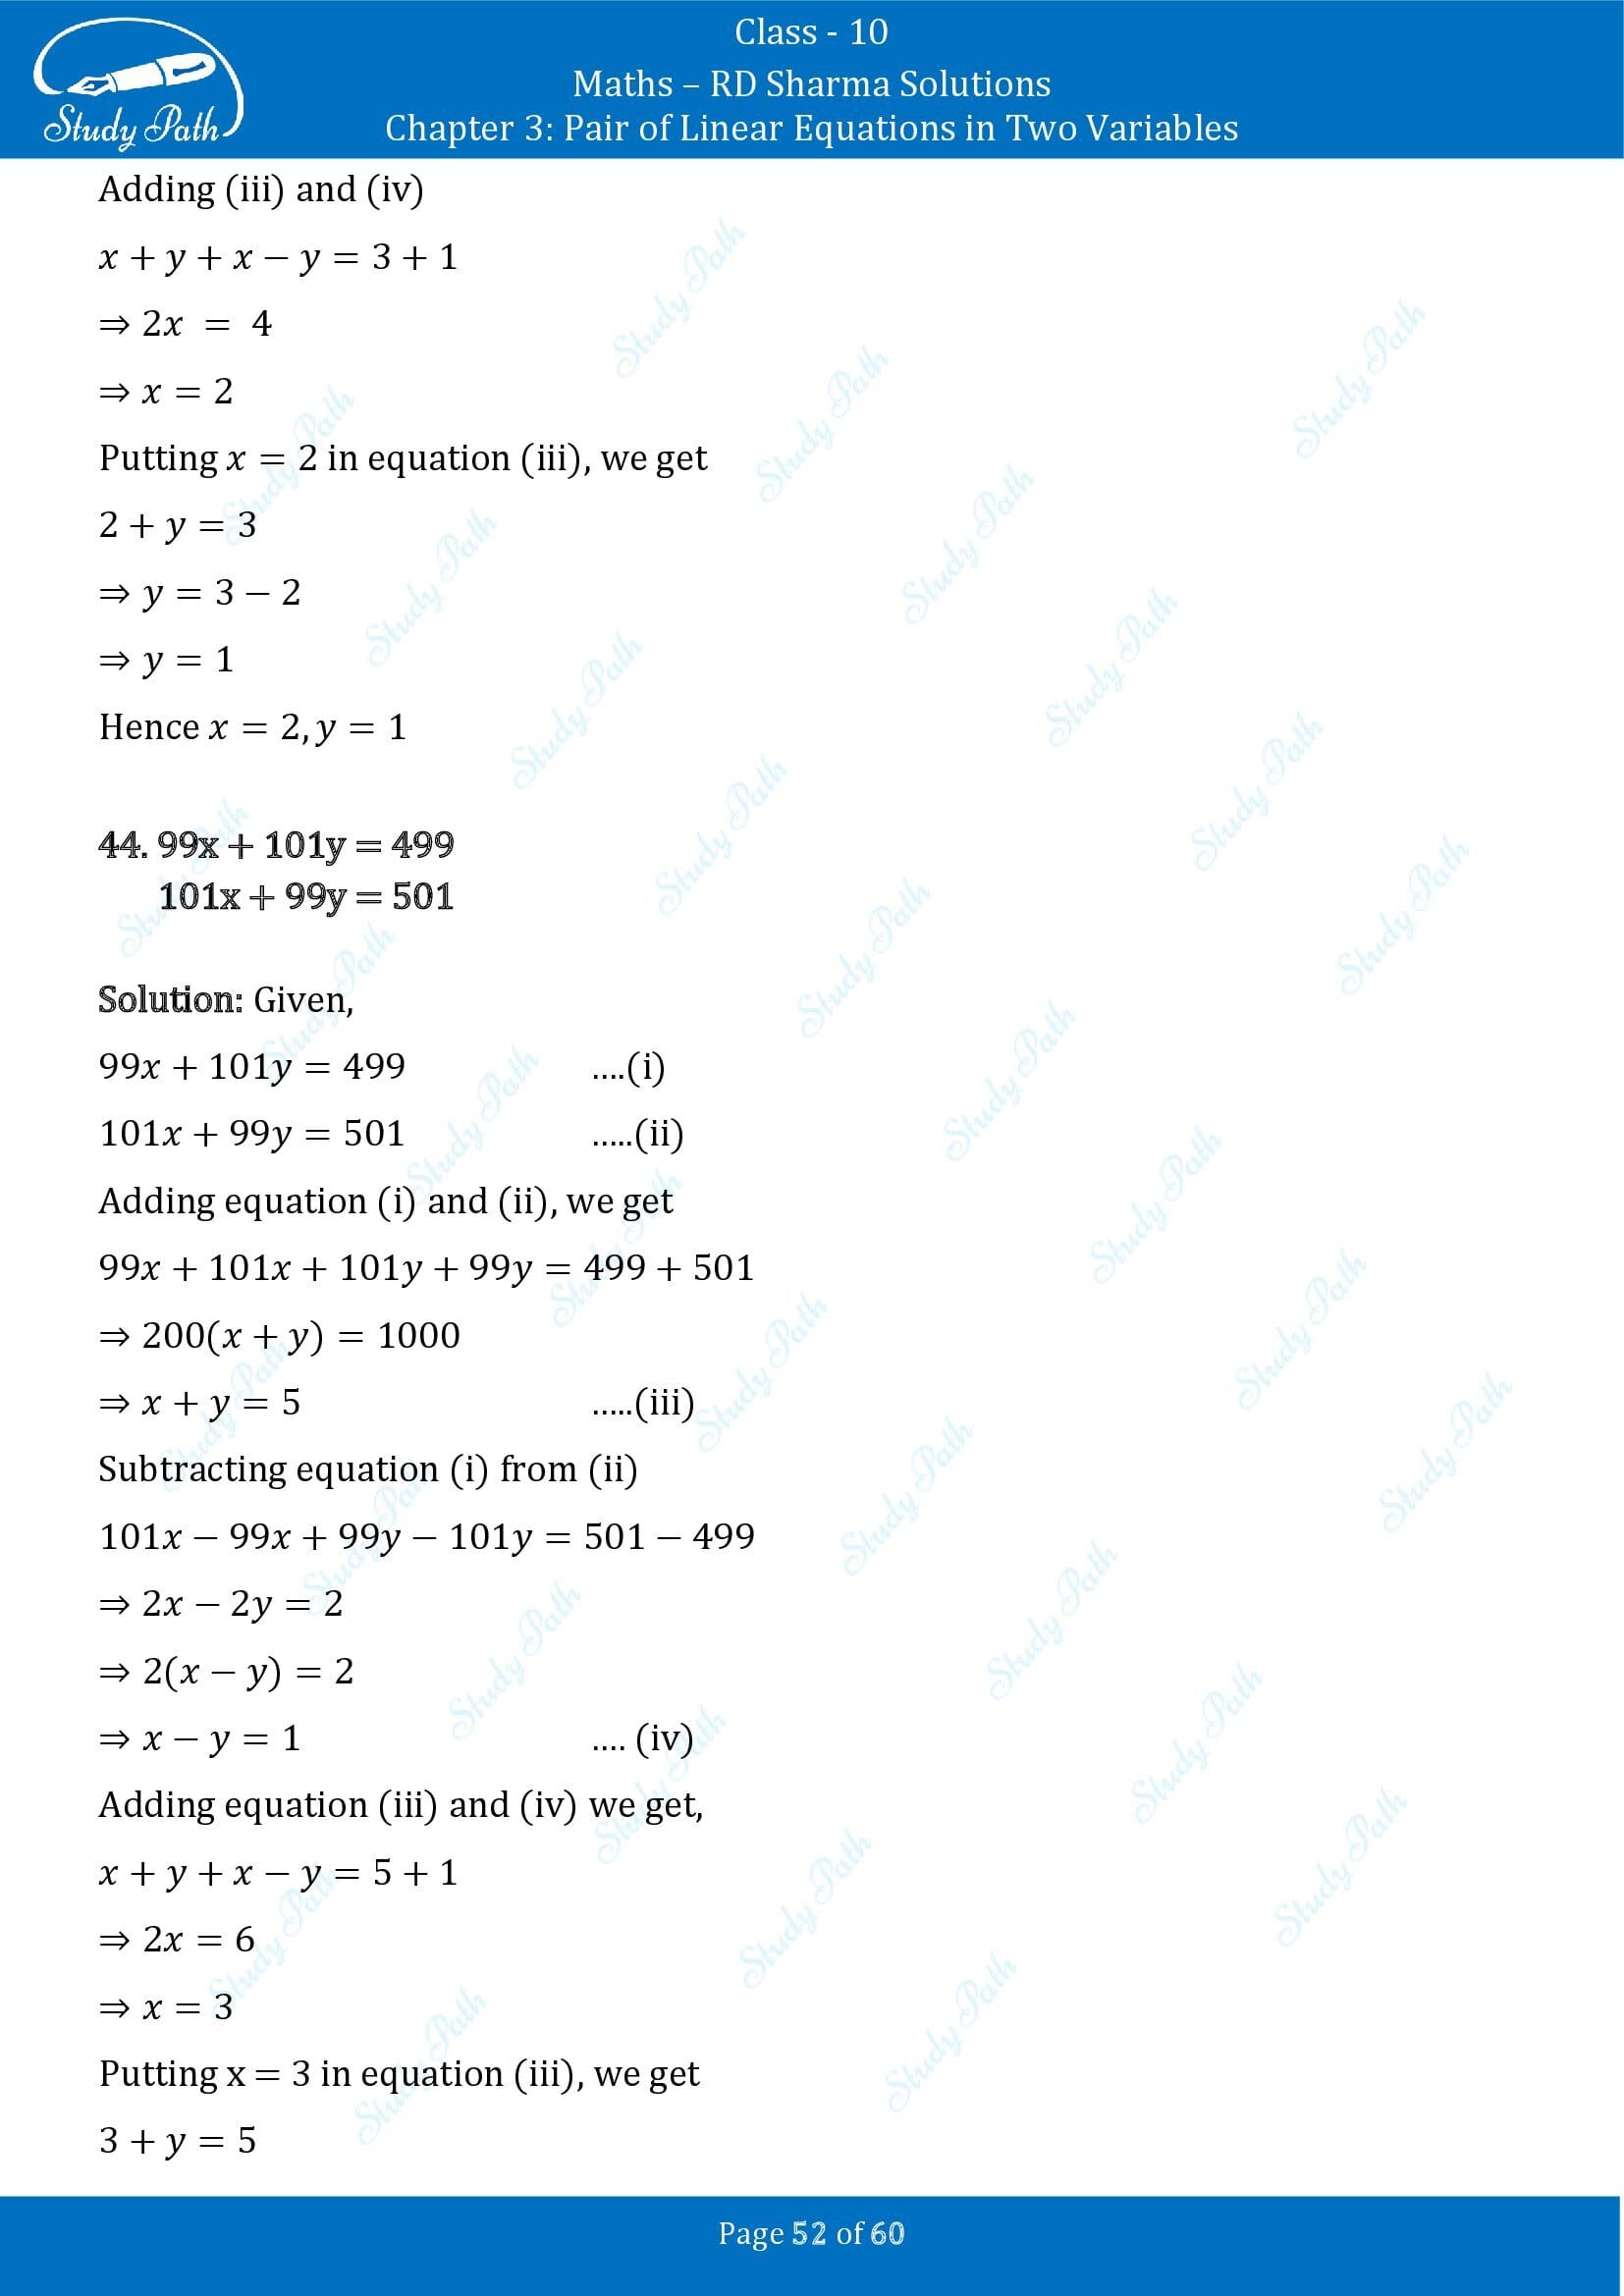 RD Sharma Solutions Class 10 Chapter 3 Pair of Linear Equations in Two Variables Exercise 3.3 00052